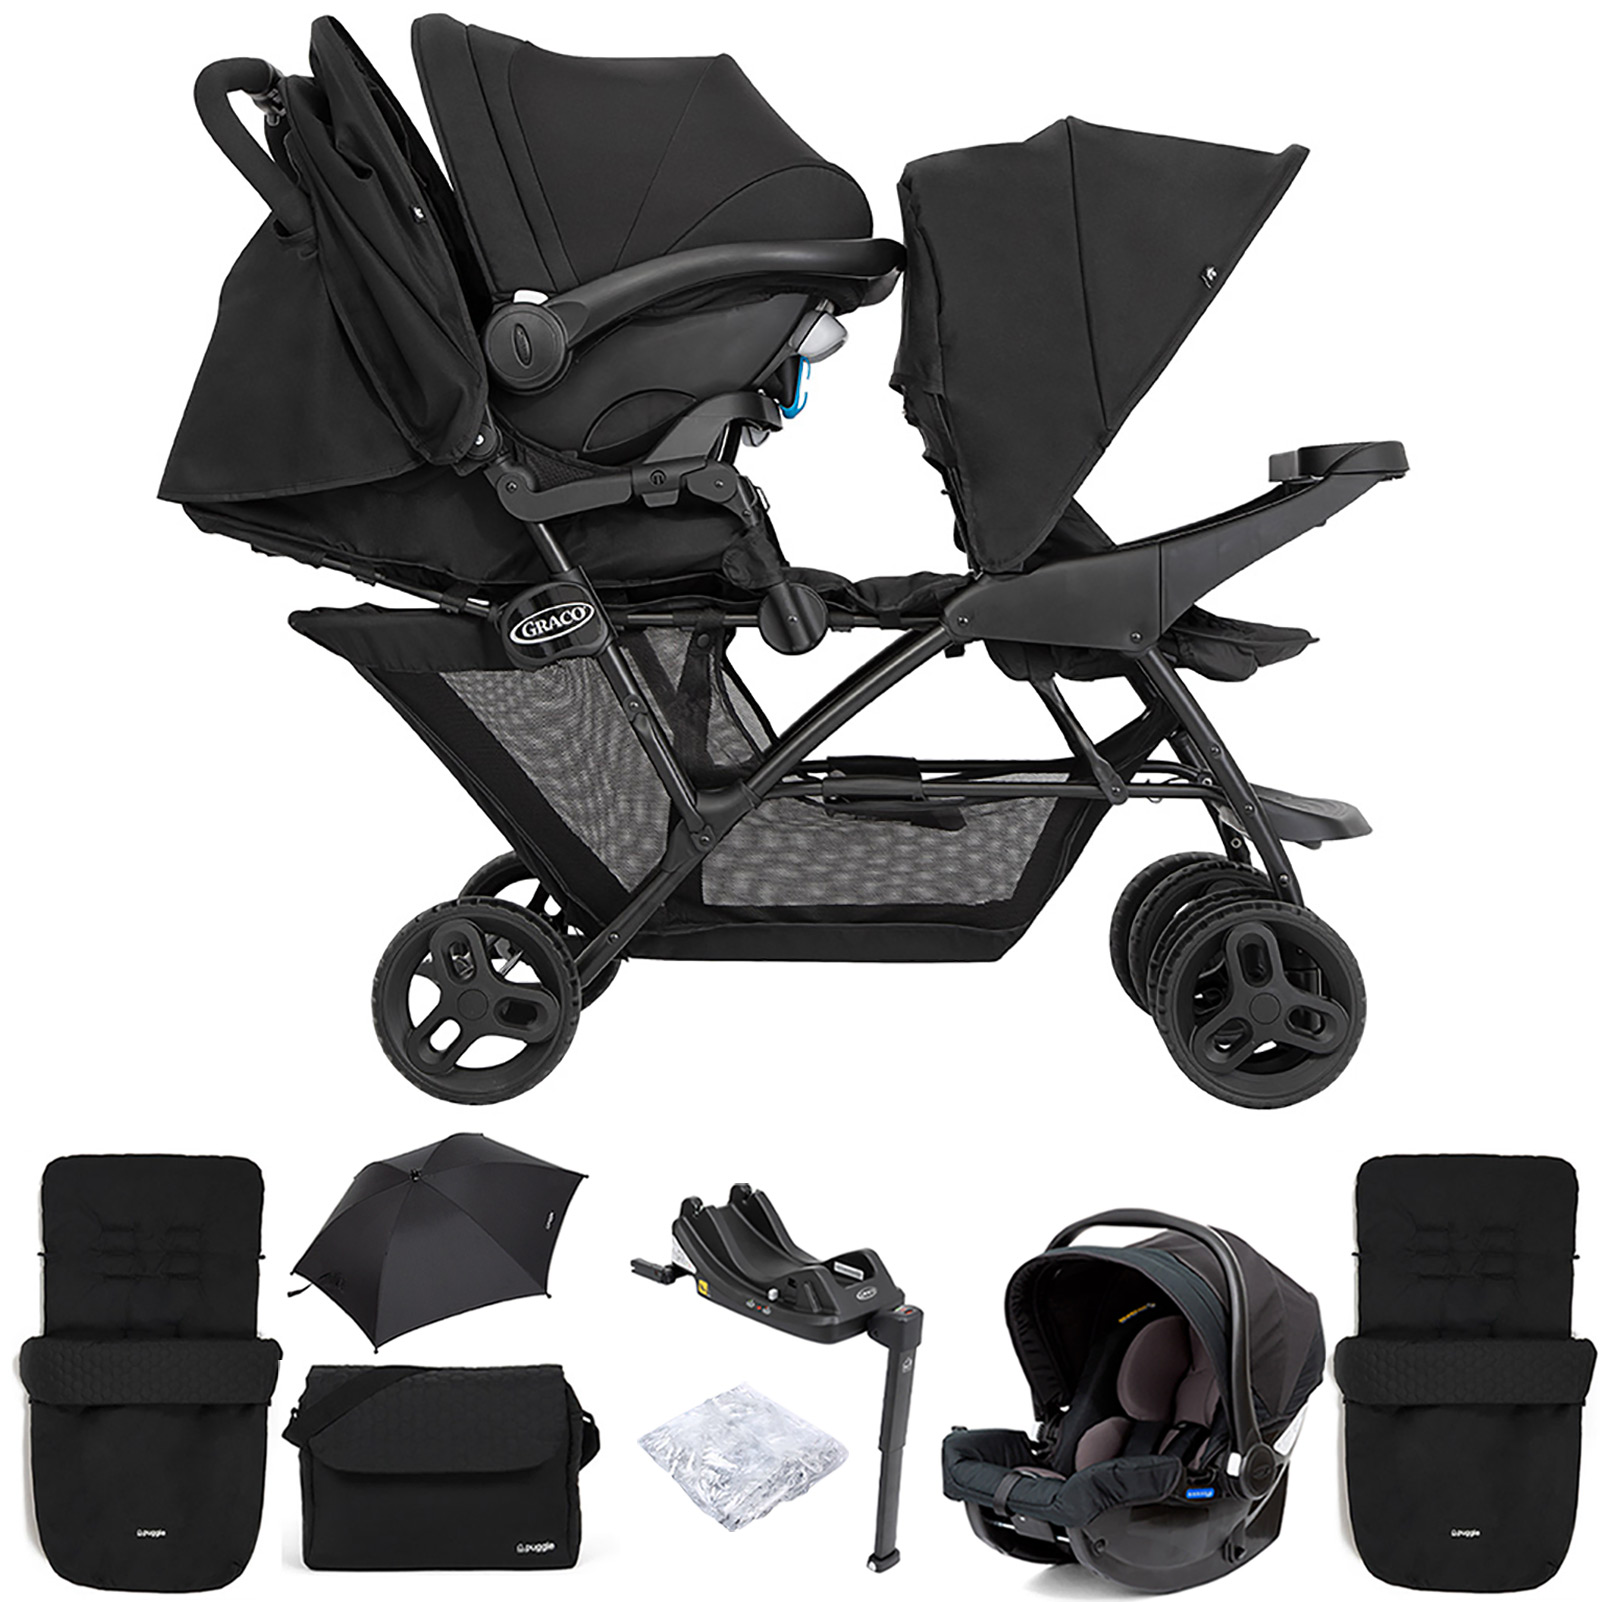 Graco Blaaze™ Stadium Duo Tandem Travel System with Front Apron, Raincover, 2 Footmuffs, Changing Bag, Car Seat, Base & Parasol - Night Sky